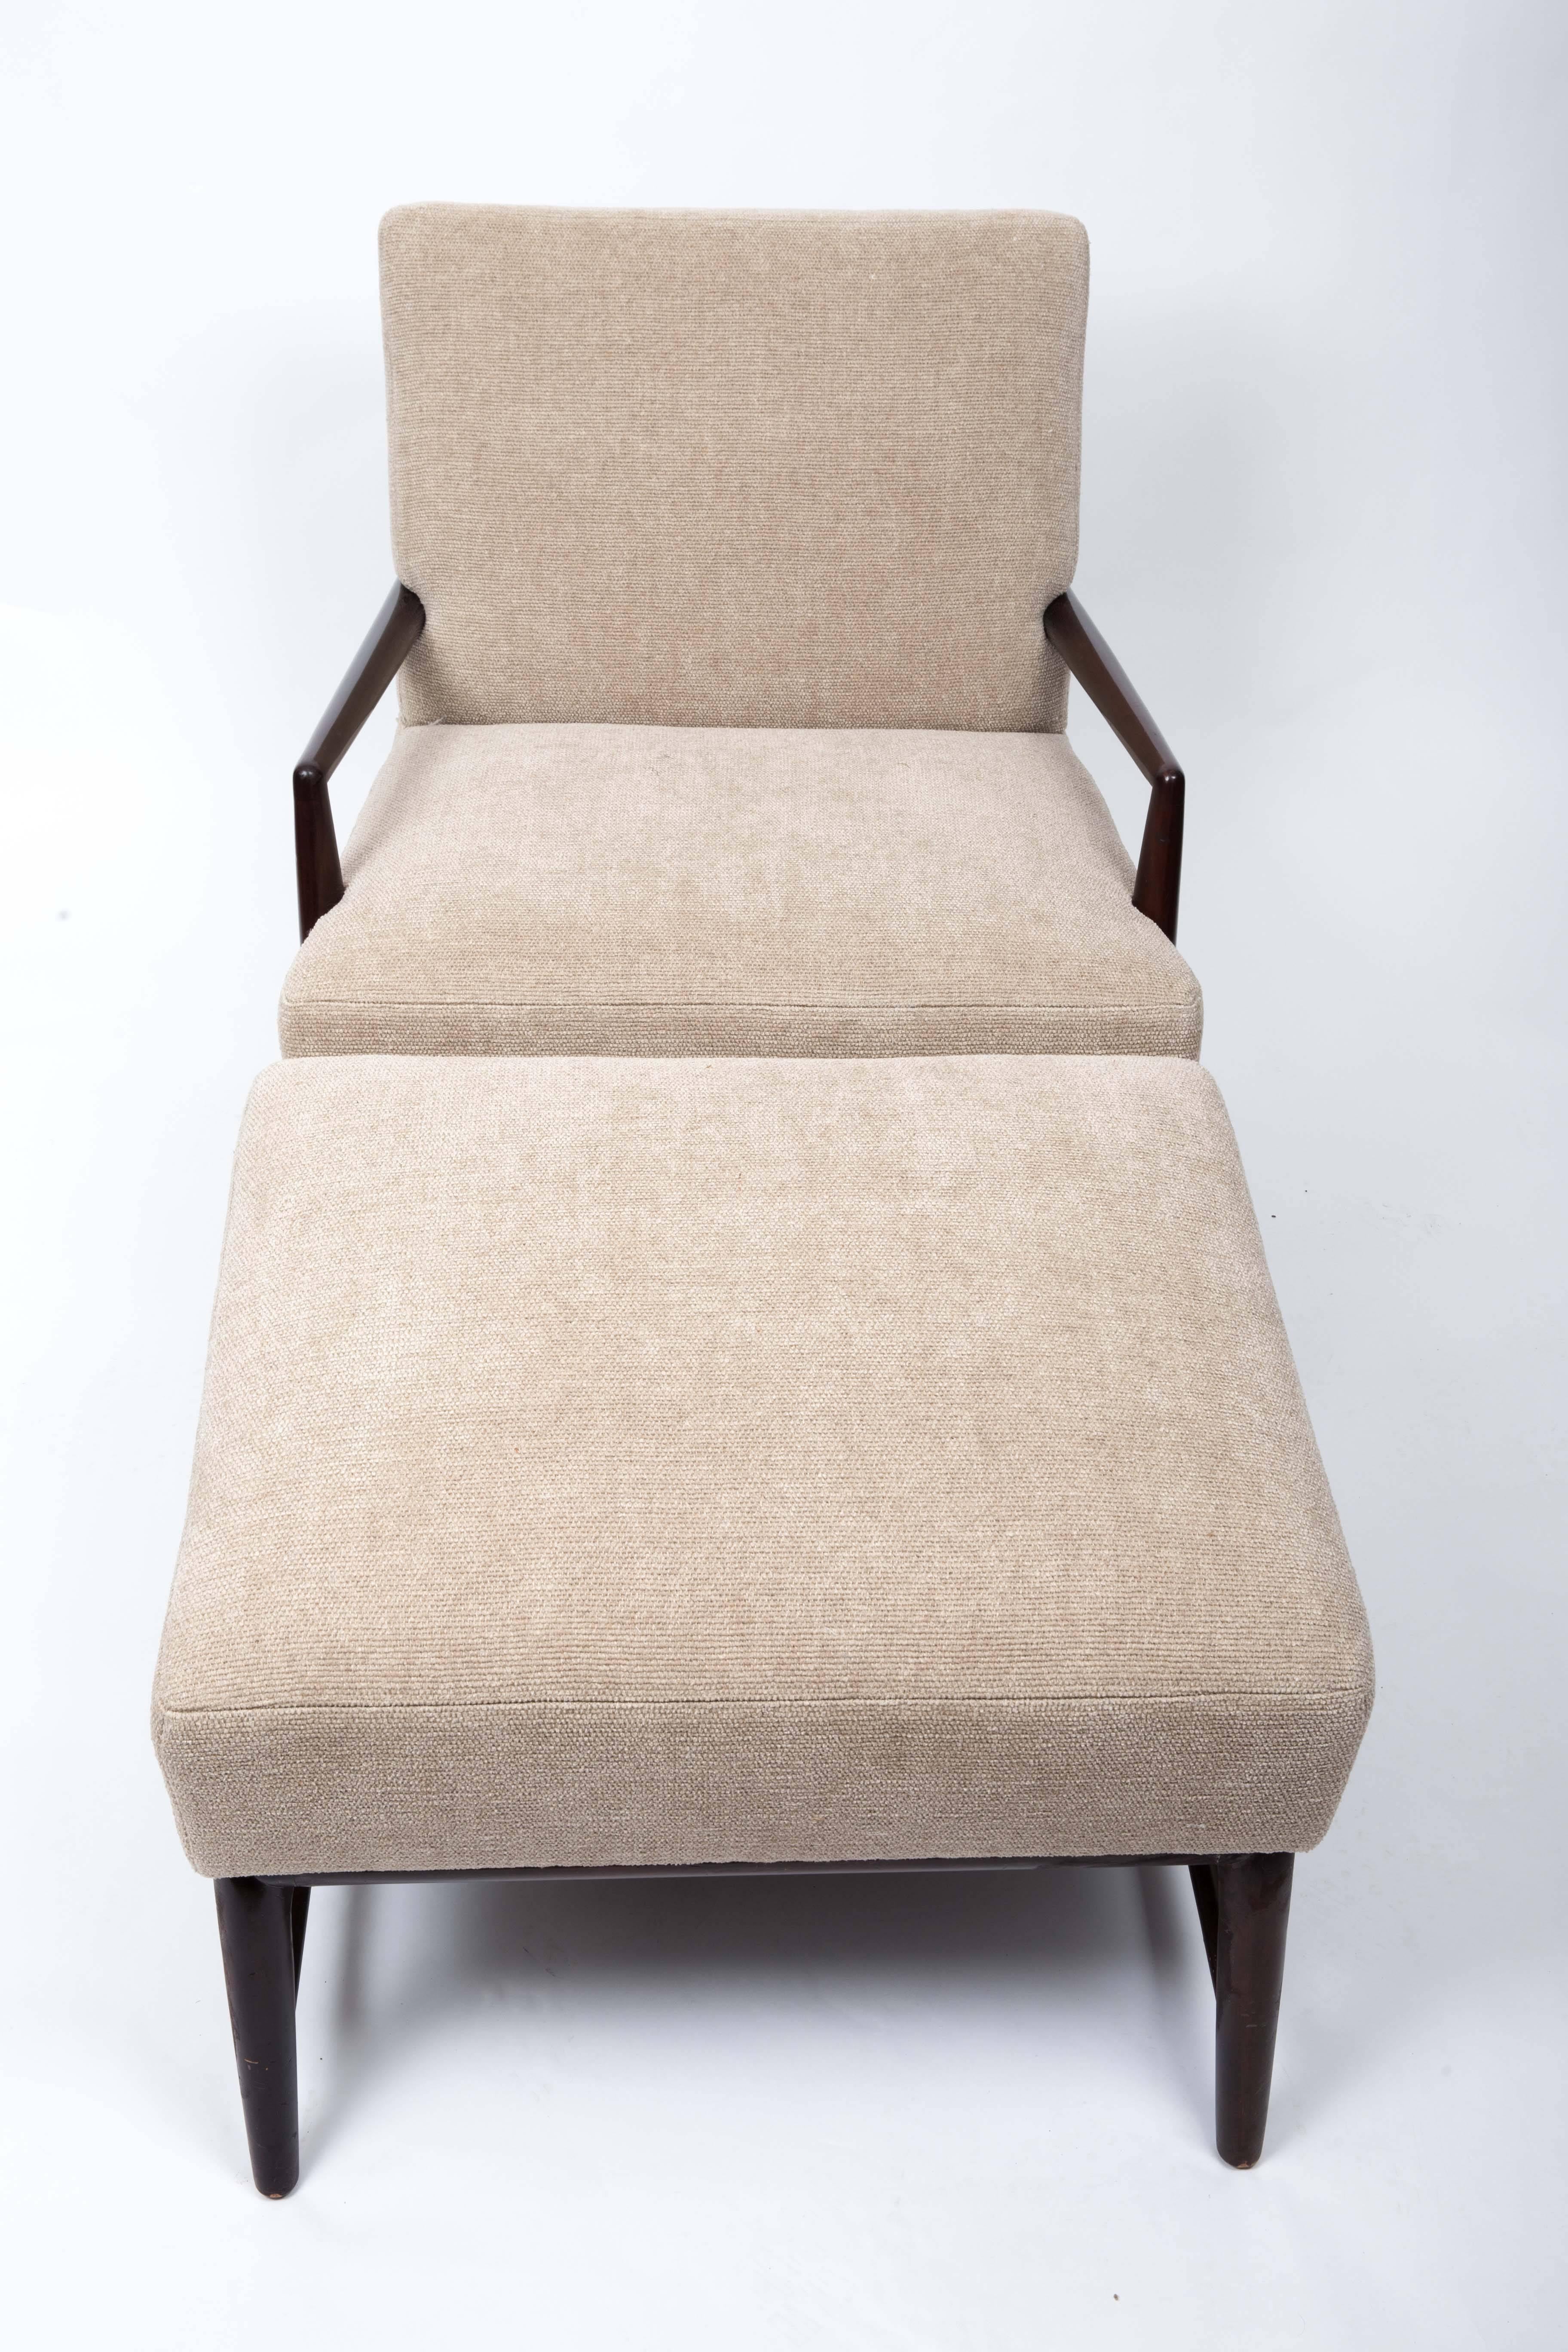 Classic mid-century armchair and ottoman by T.H. Robsjohn-Gibbings. 
Elegant wood frame, angular arms and legs, and brand new upholstery in a warm cream. 
